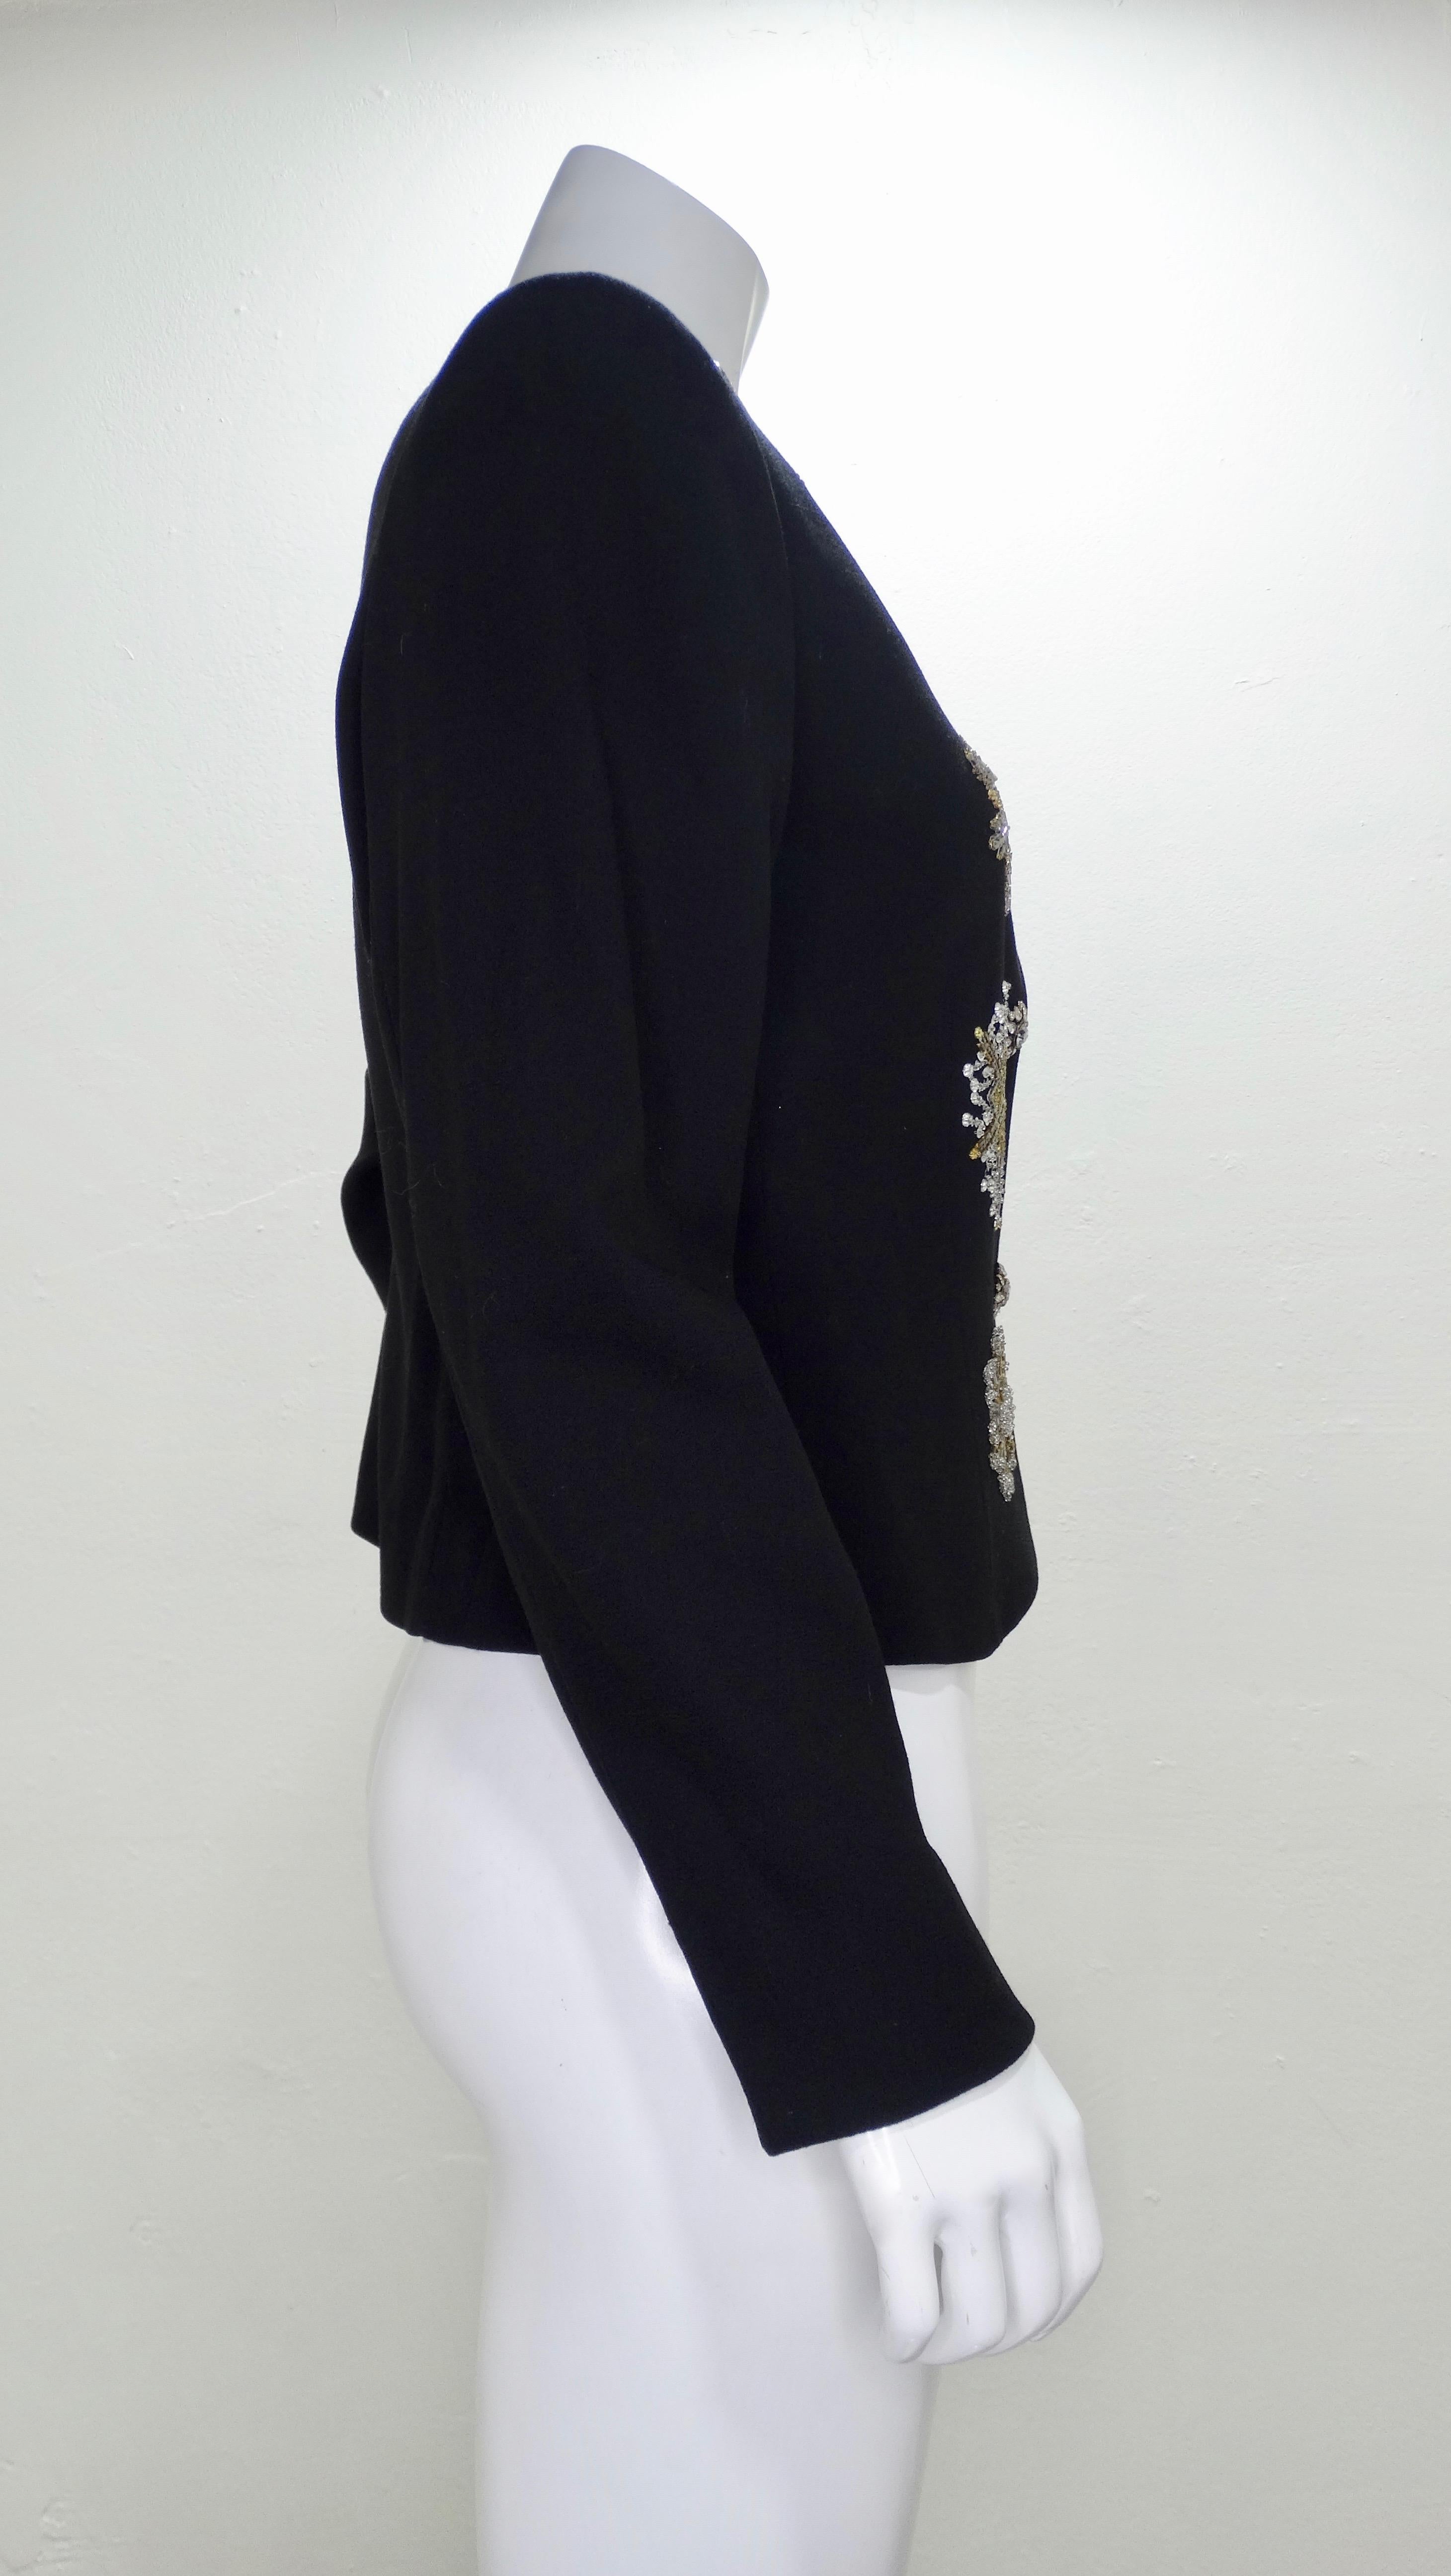 From the Dior archives straight to your closet! Runway circa early 1980s from Marc Bohan, this cropped black blazer was custom made and is a numbered piece 00590. All embroidery was done by Lesage. Blazer is embellished with intricately beaded